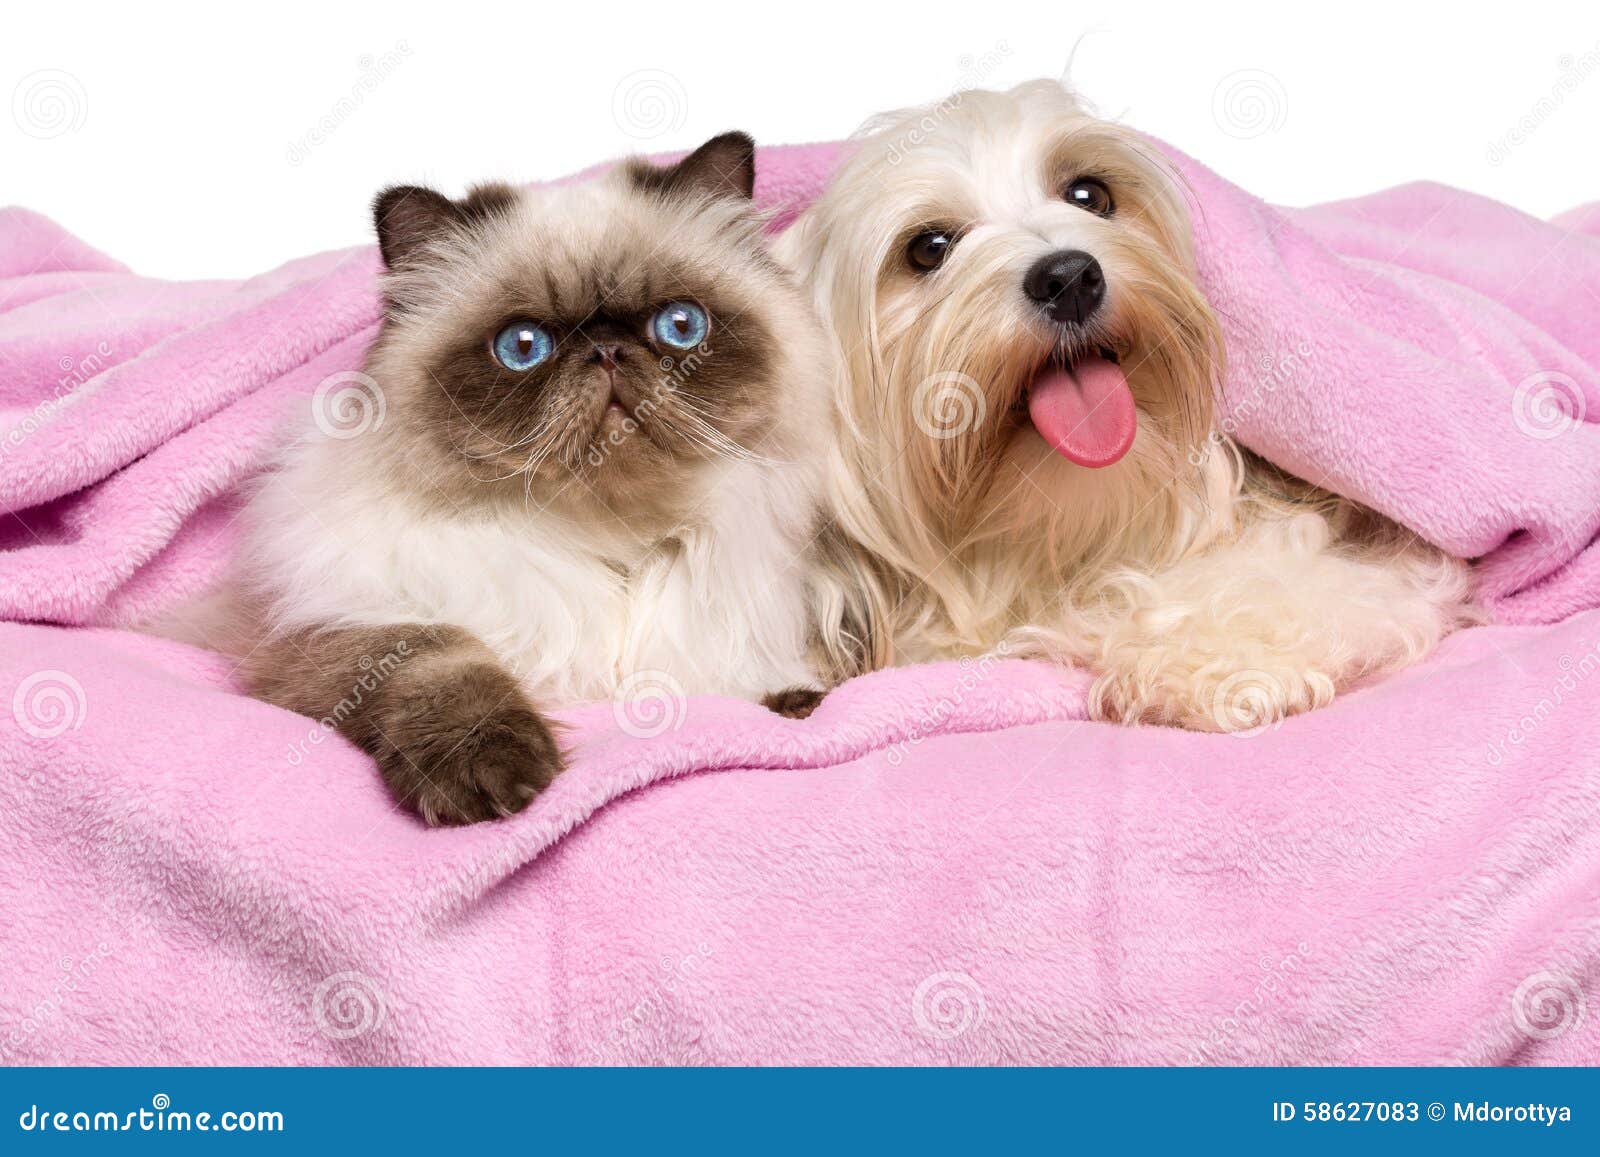 young persian cat and a happy havanese dog lying on a bedspread